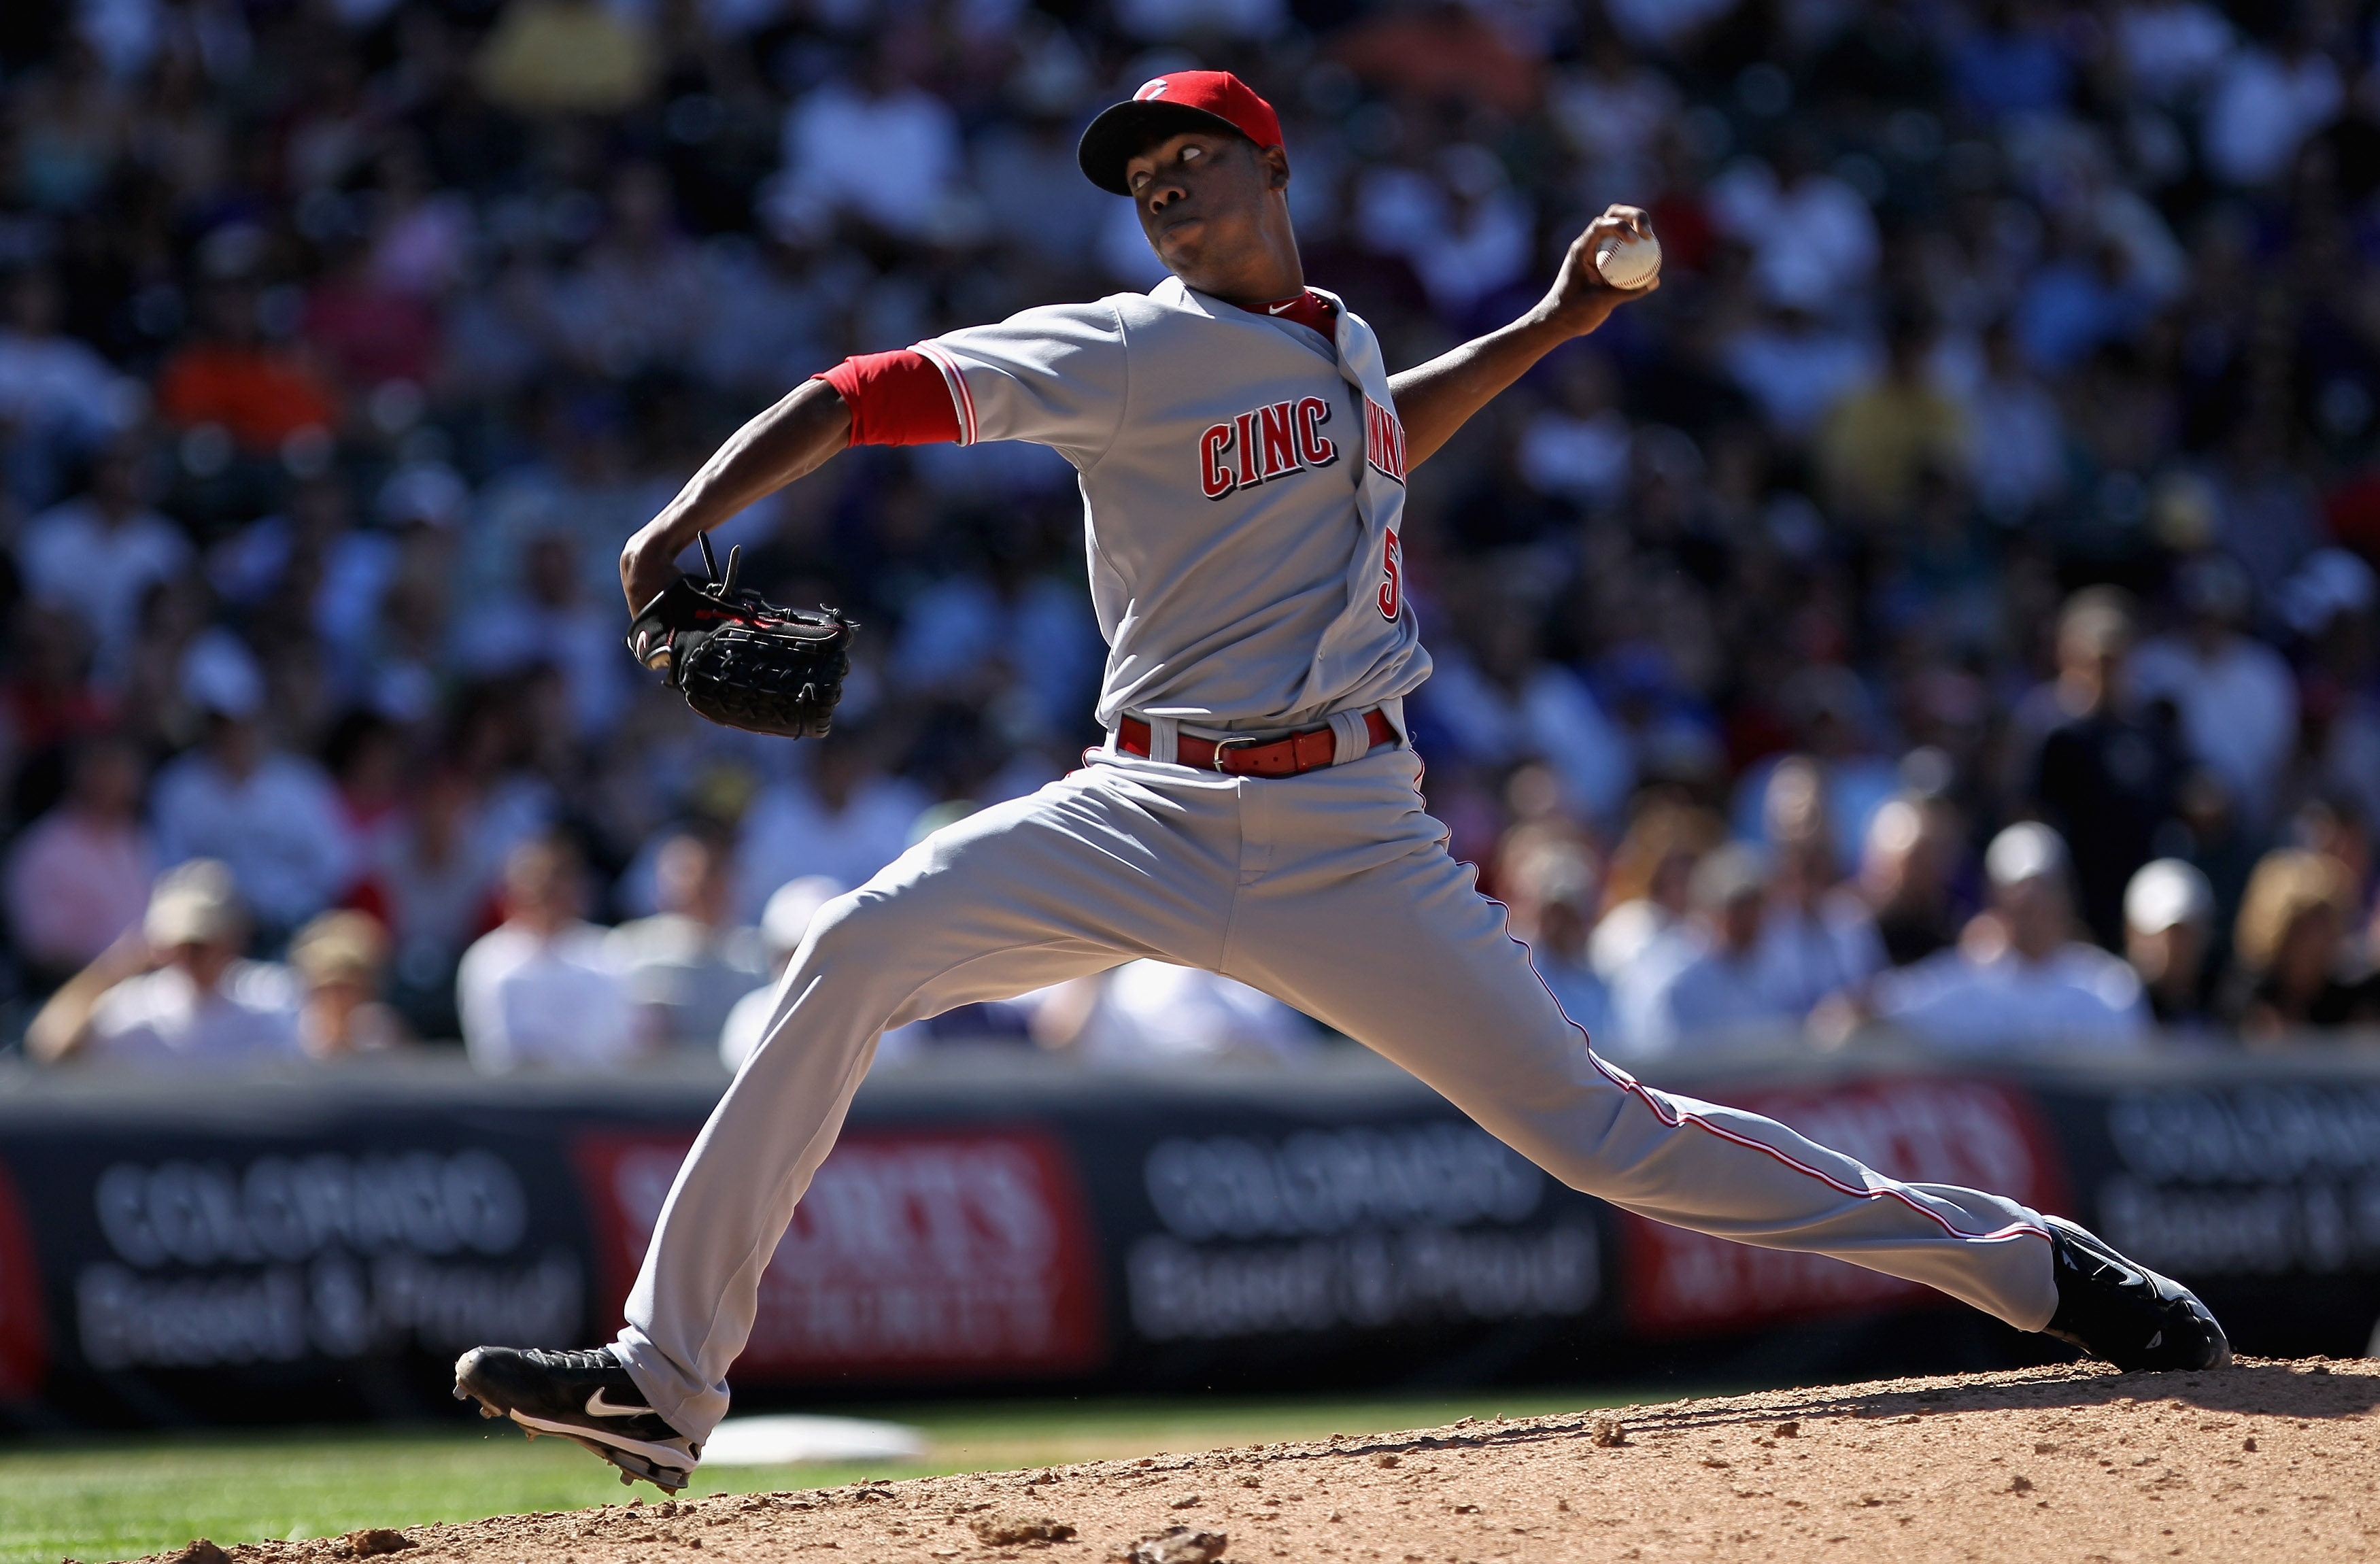 Aroldis Chapman Holds The Record For MLB's Fastest Pitch